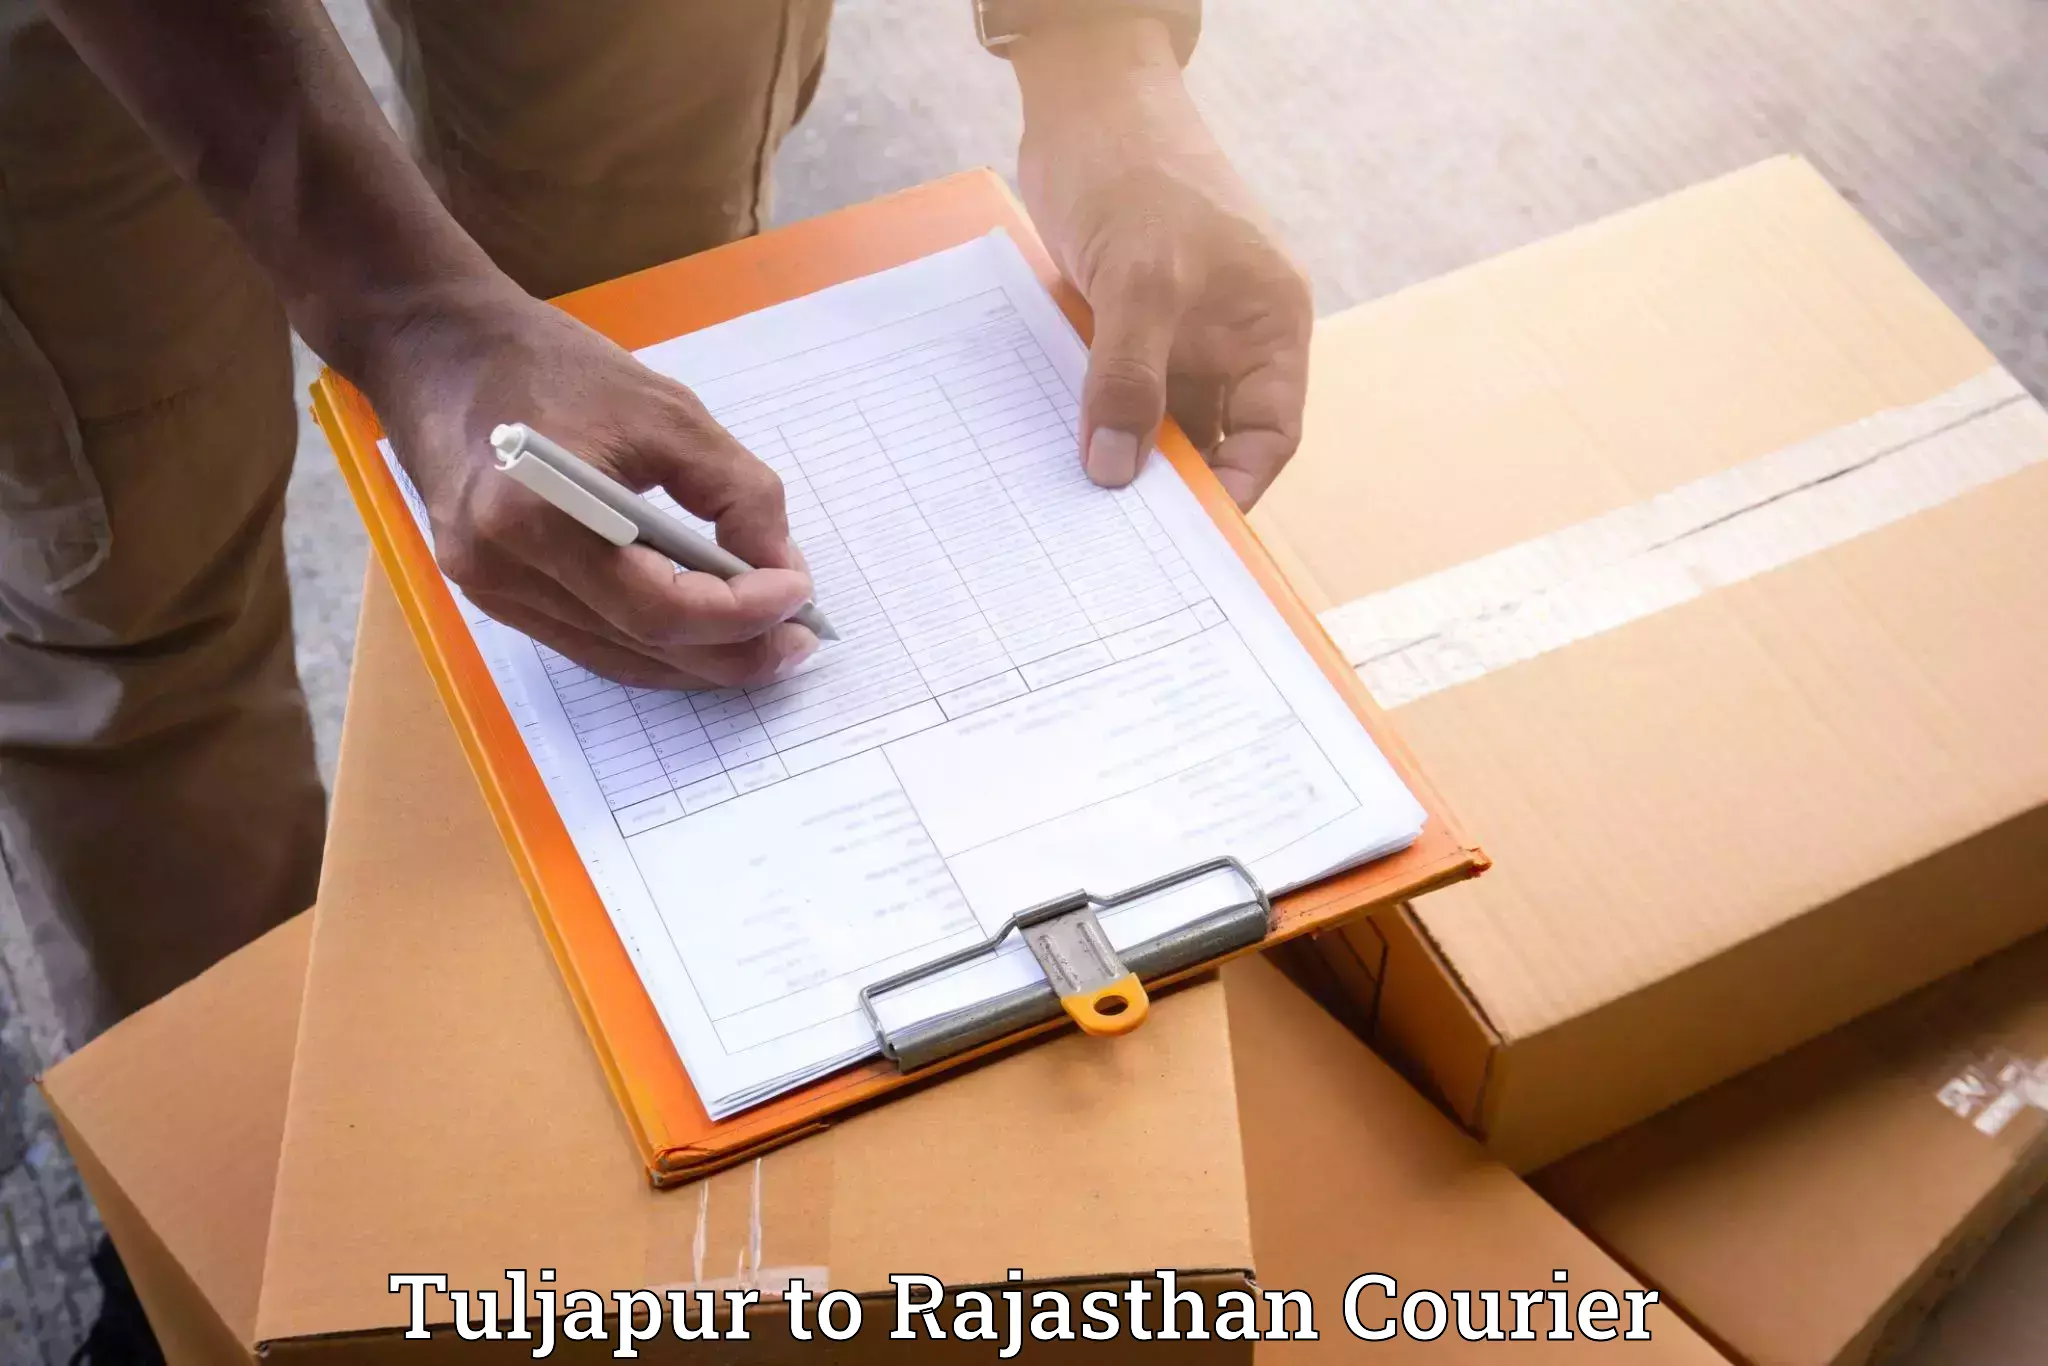 Budget-friendly movers Tuljapur to Rajasthan